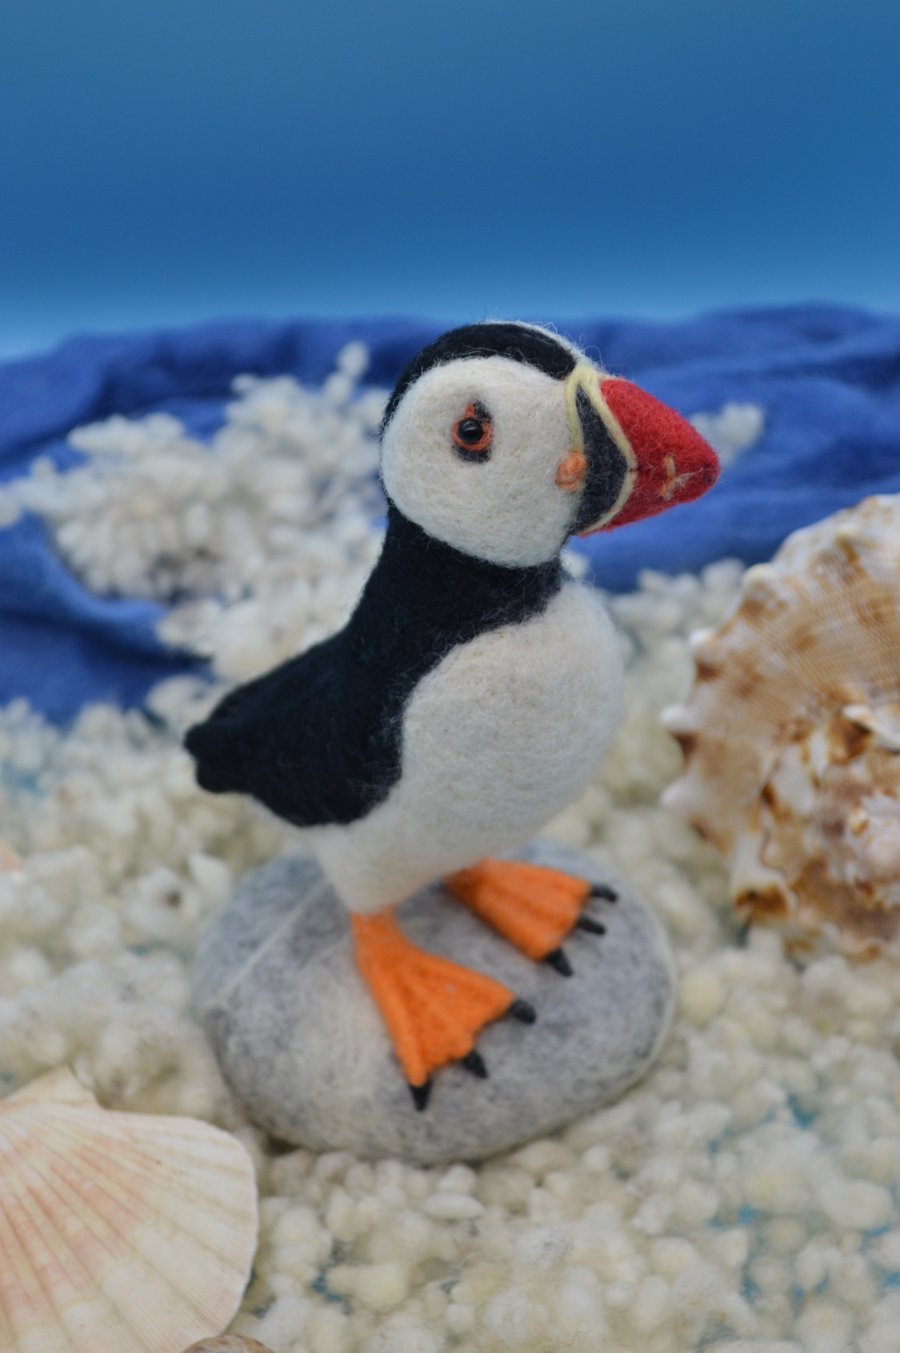 Needle Felted Puffin